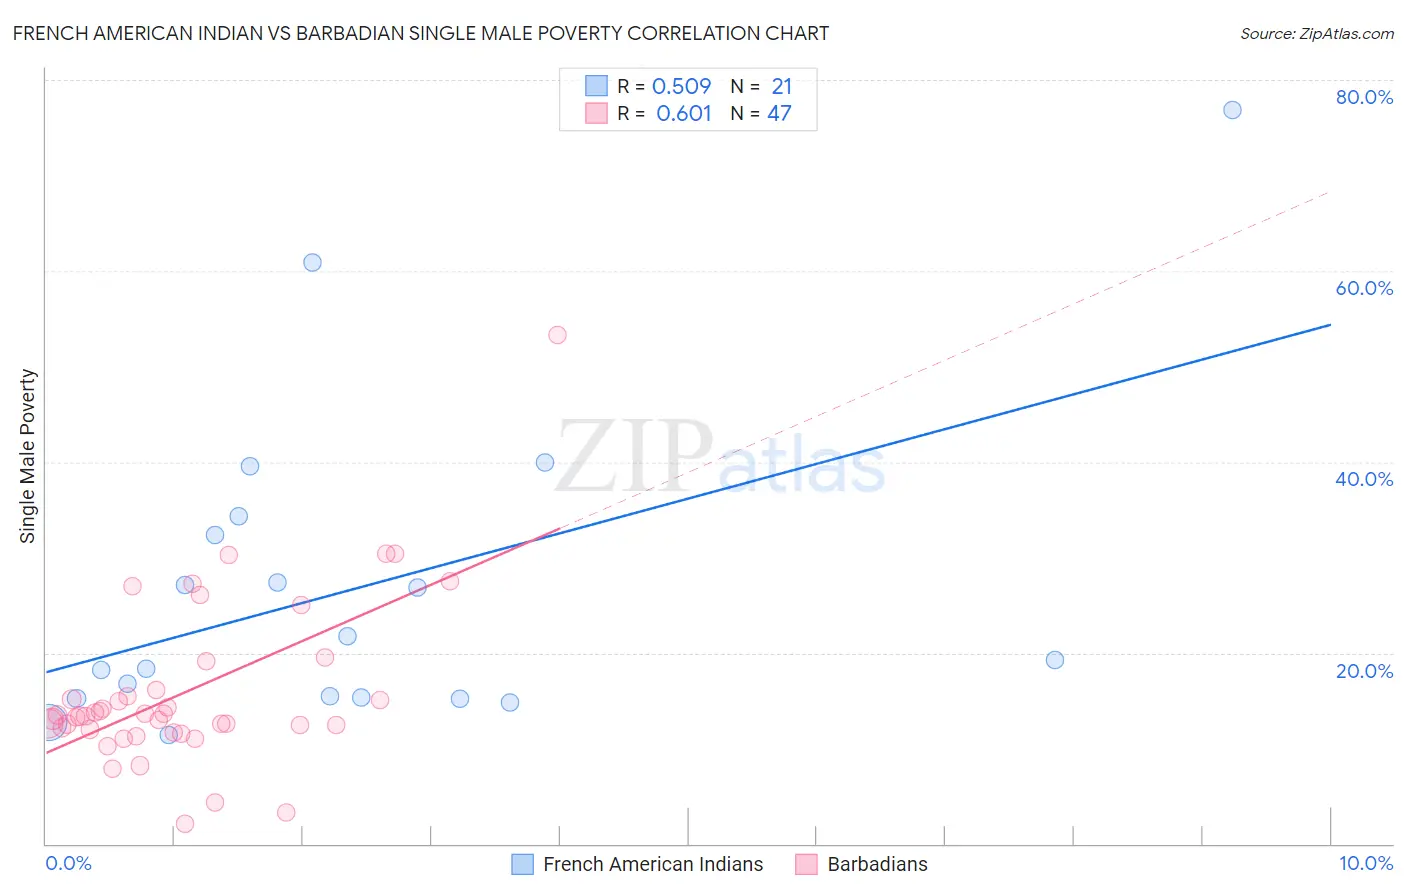 French American Indian vs Barbadian Single Male Poverty